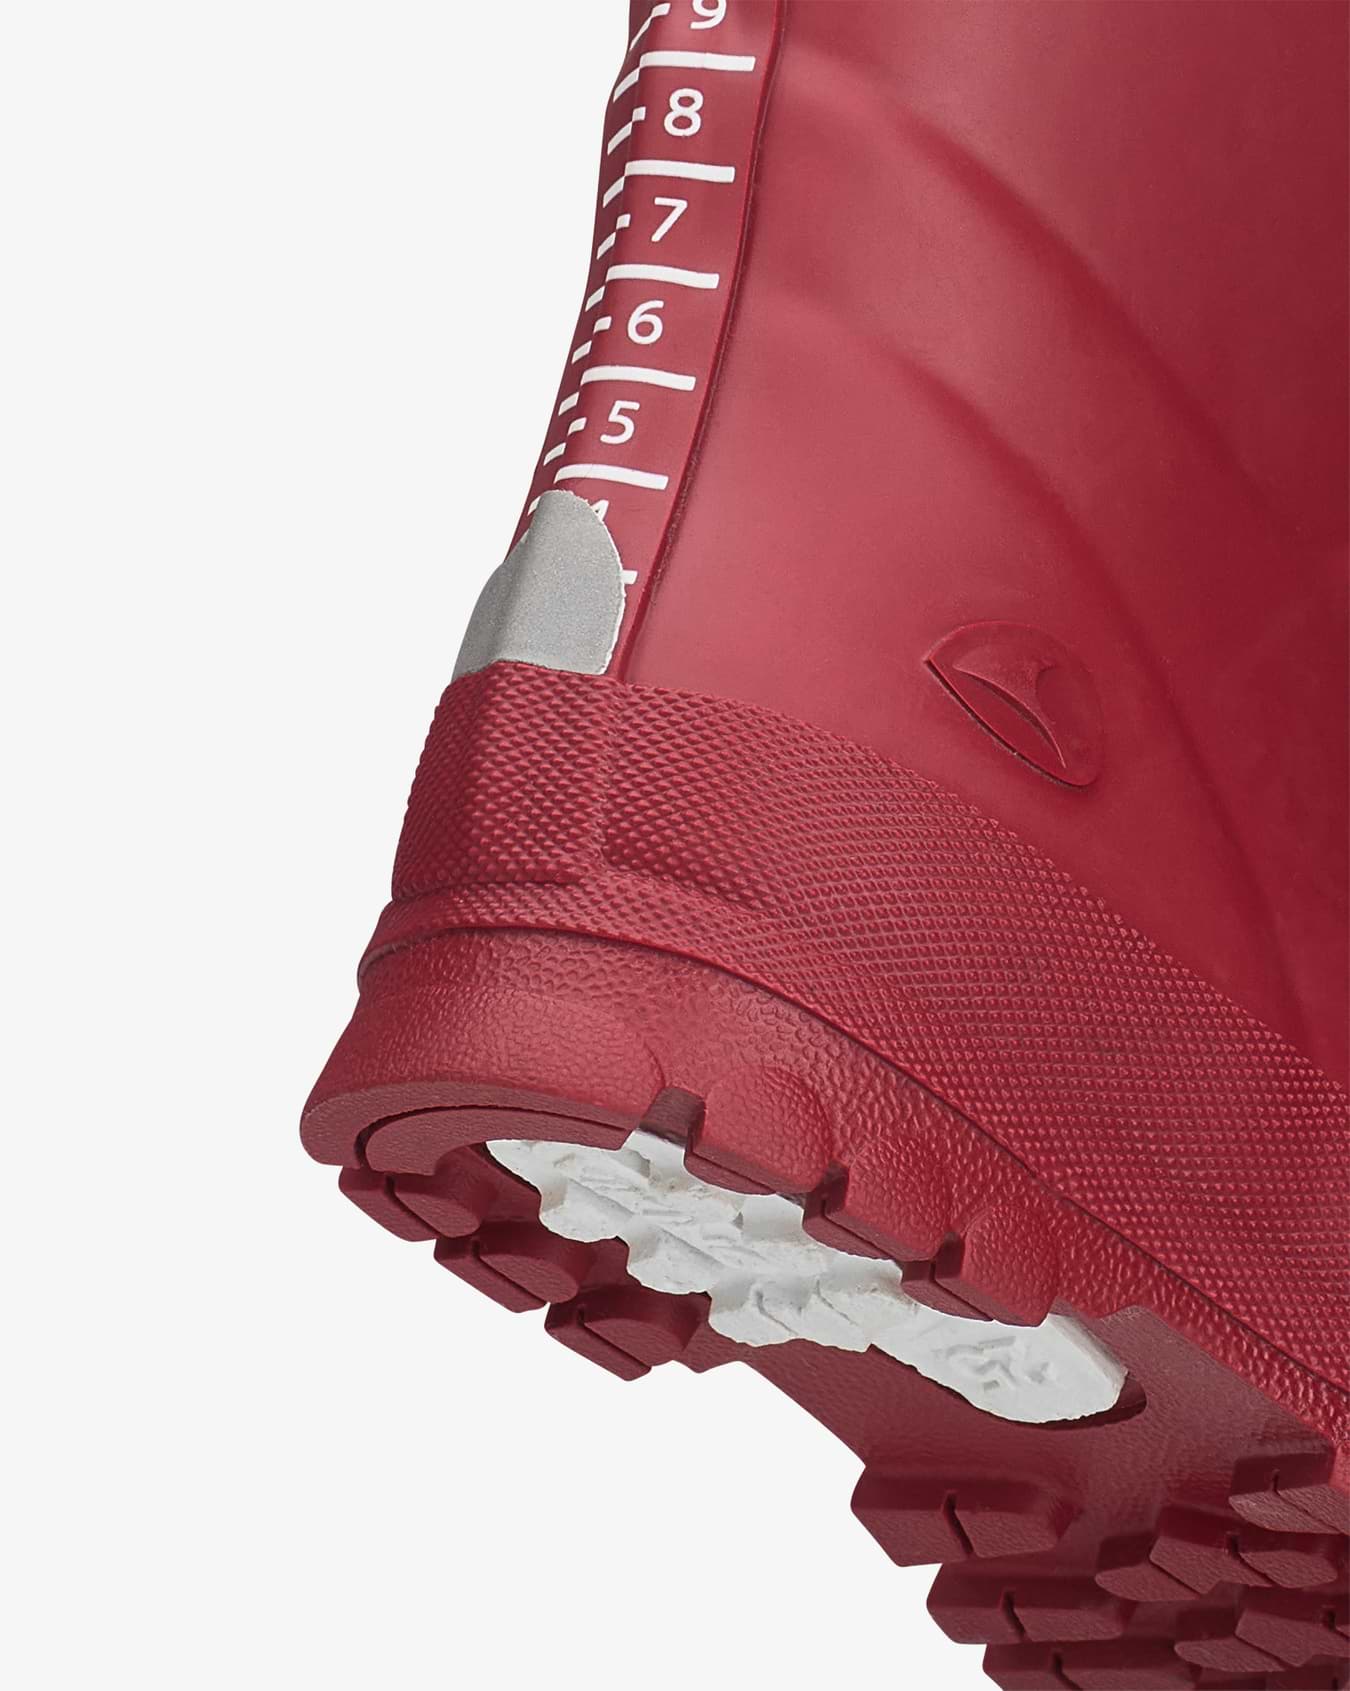 Alv Jolly Red Rubber Boot